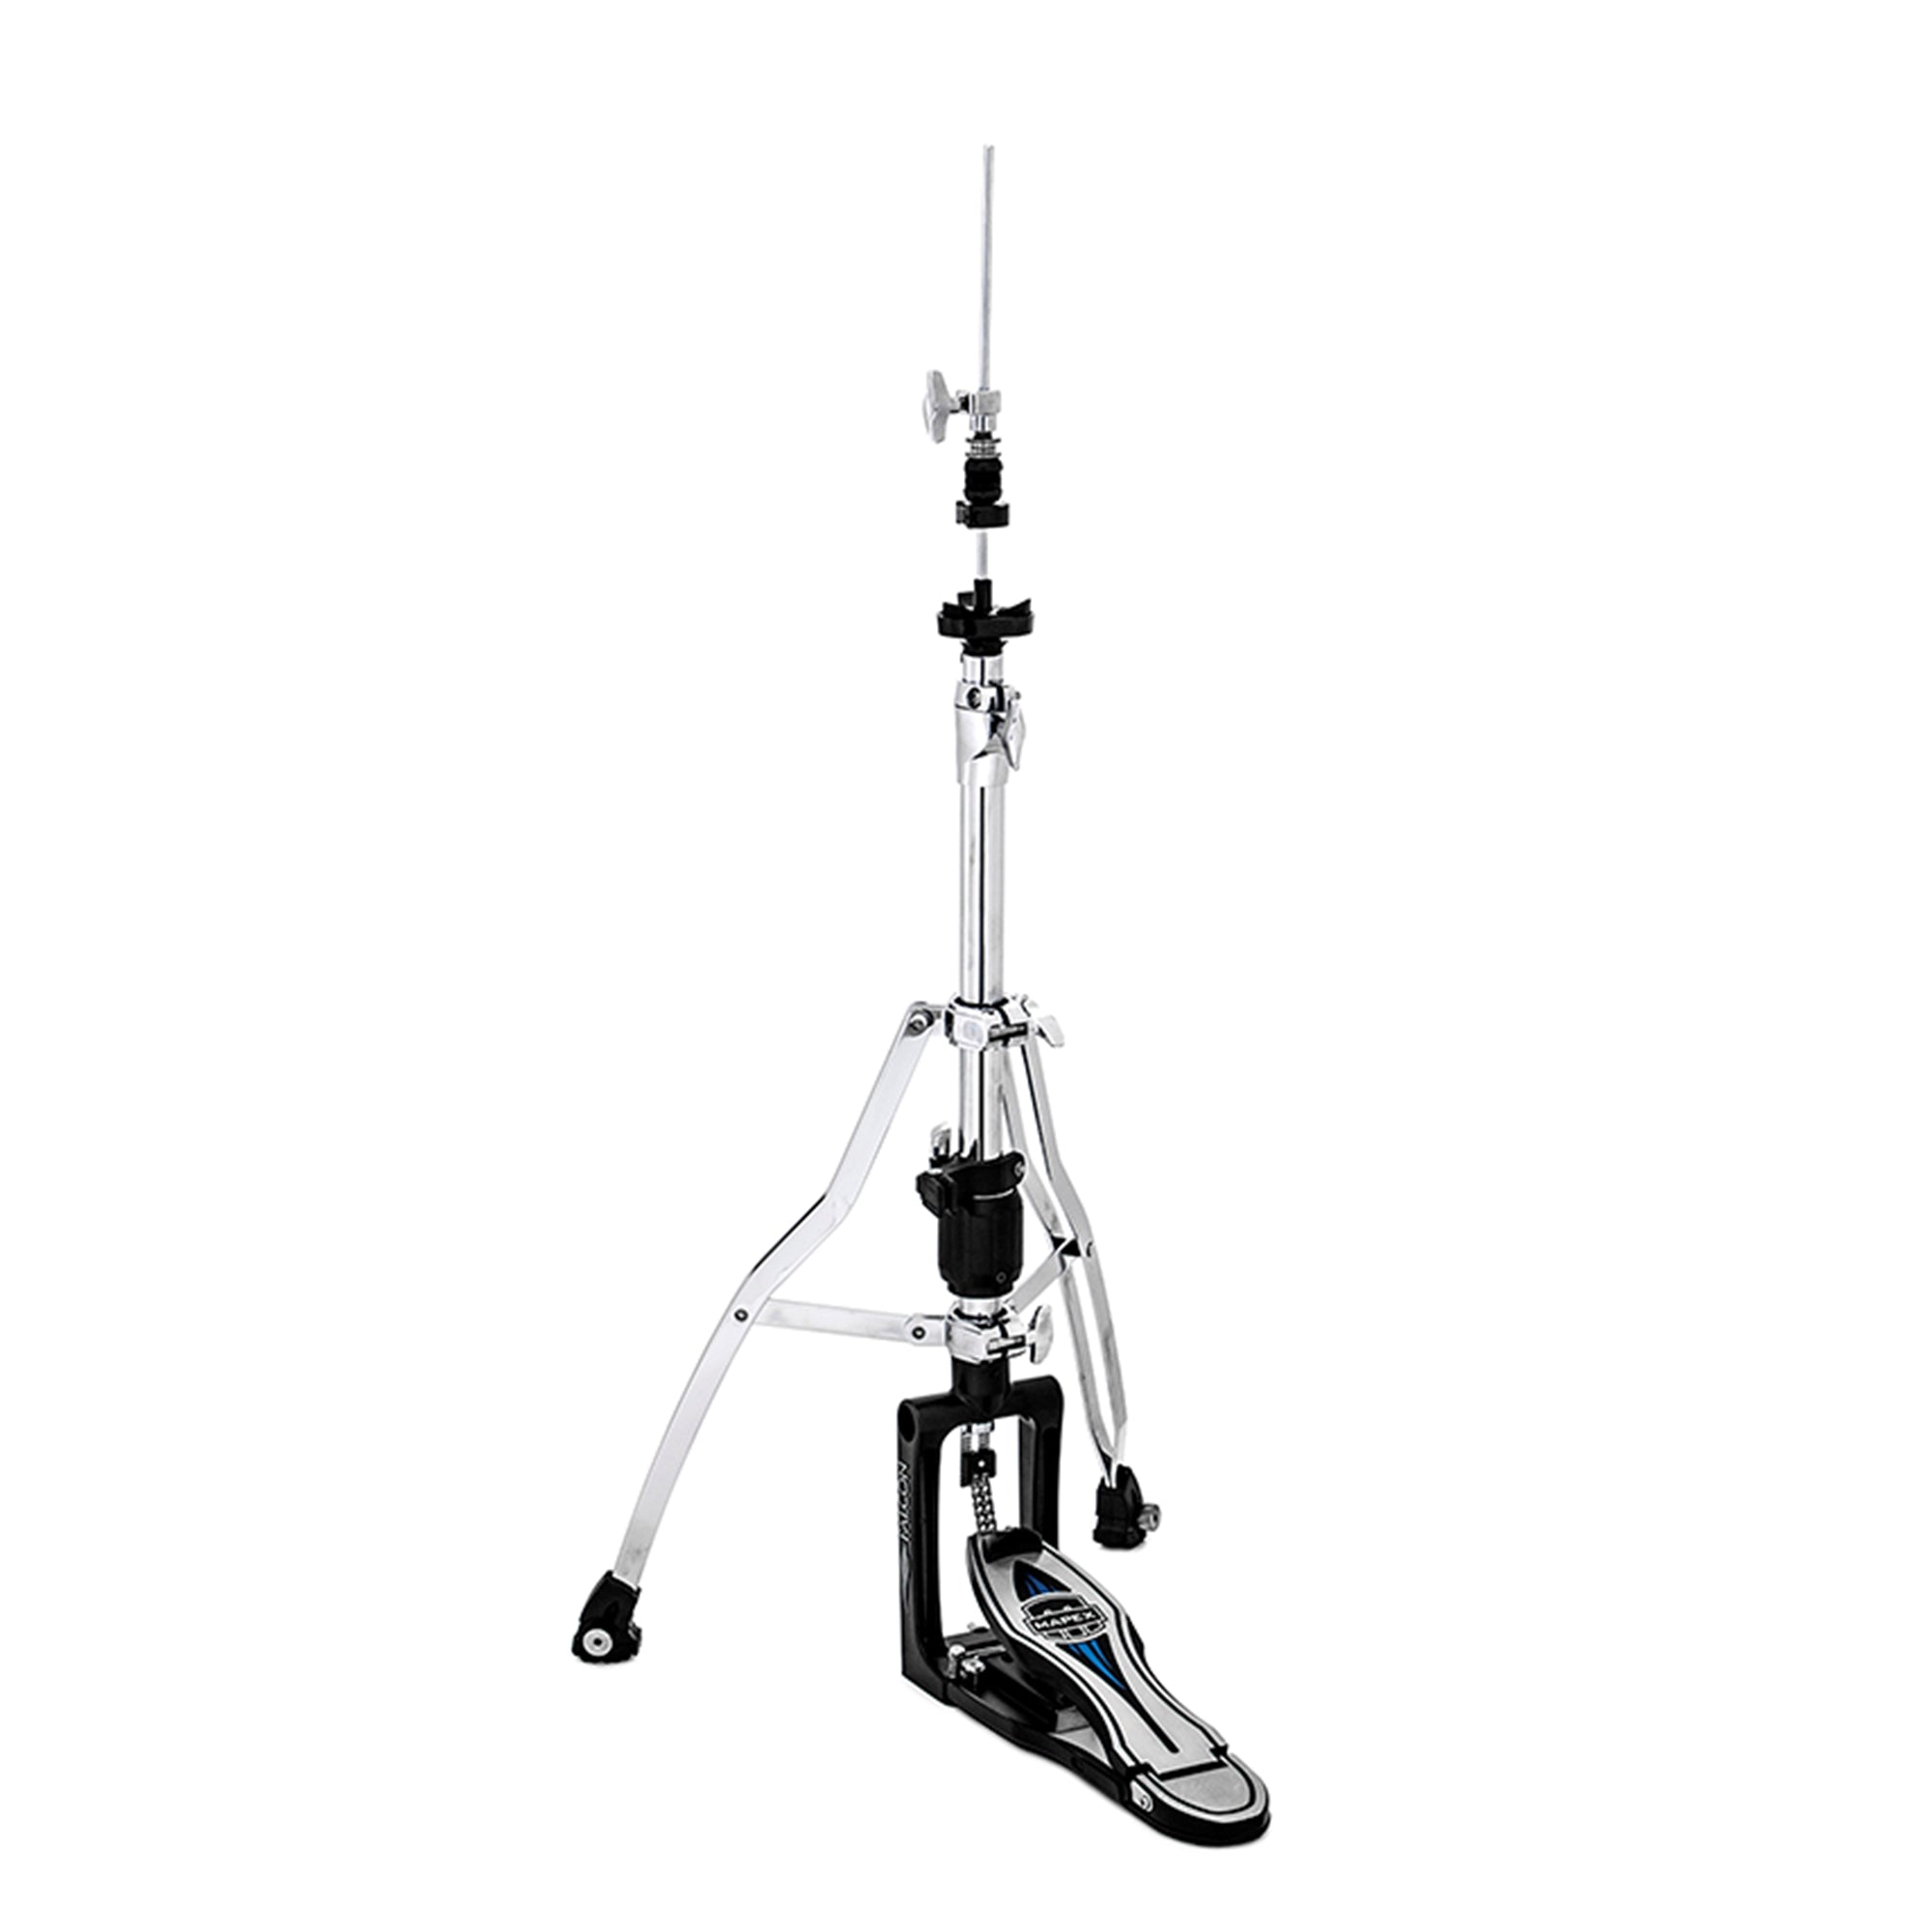 Mapex HF1000 Falcon Direct Drive Double Braced Hi-Hat Stand with Removable Legs and Quick Release